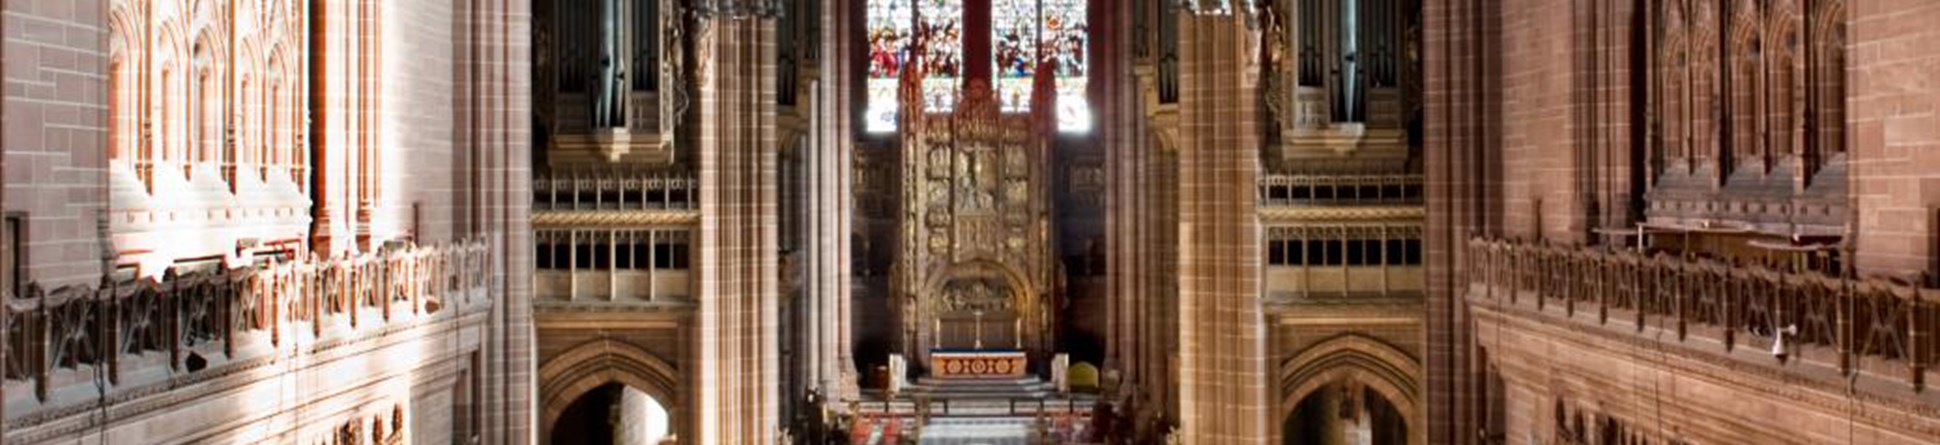 Interior of Anglican Cathedral, Liverpool.